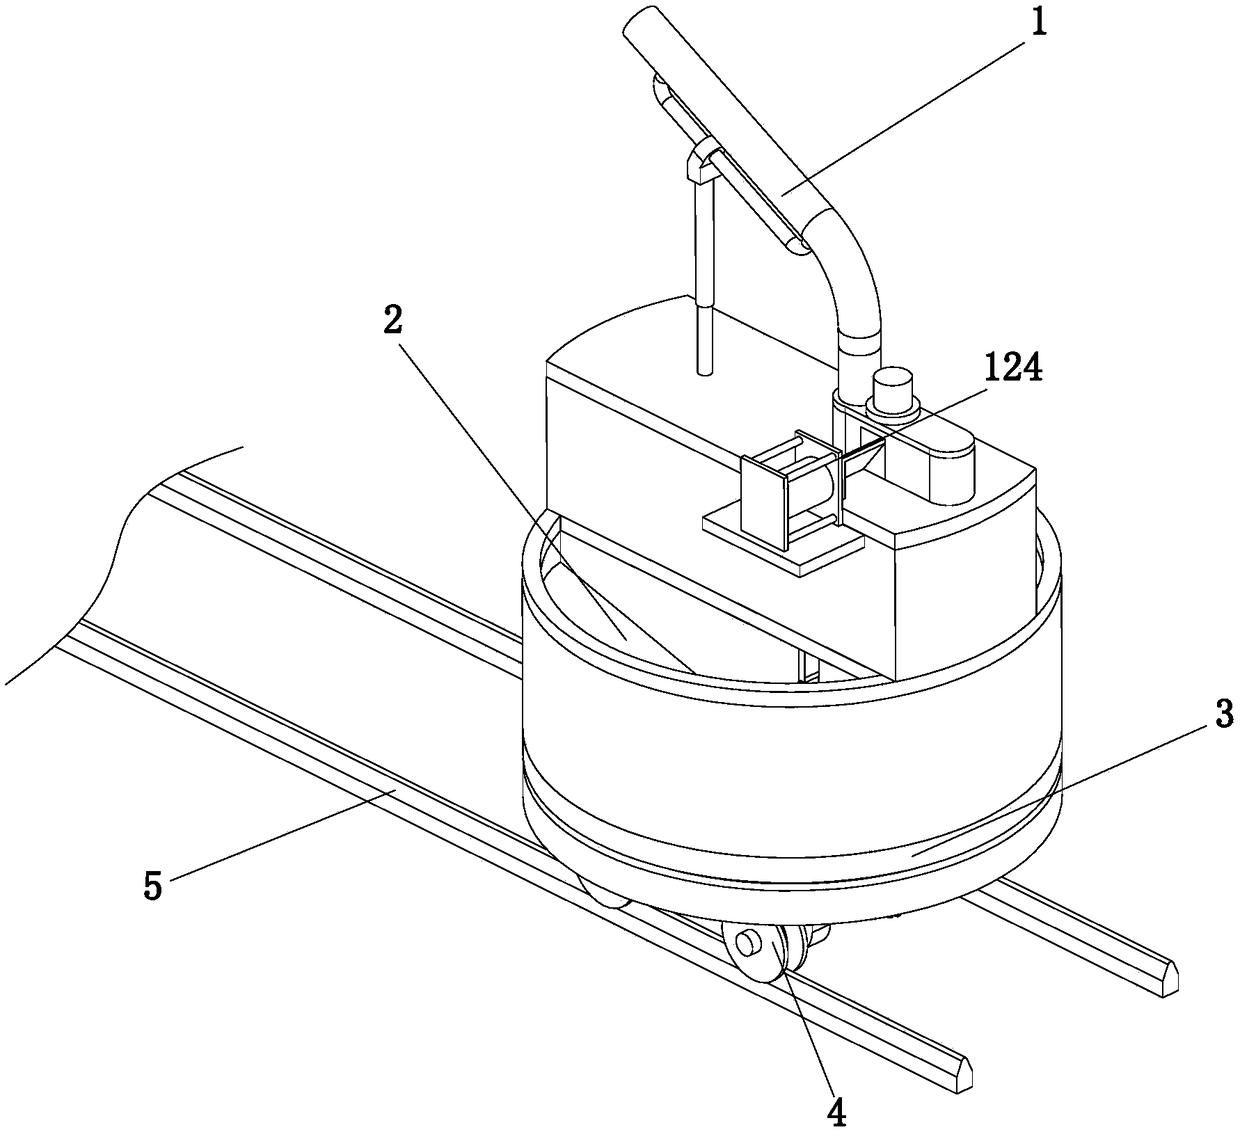 Working method of universal automatic ball serving device for tennis training